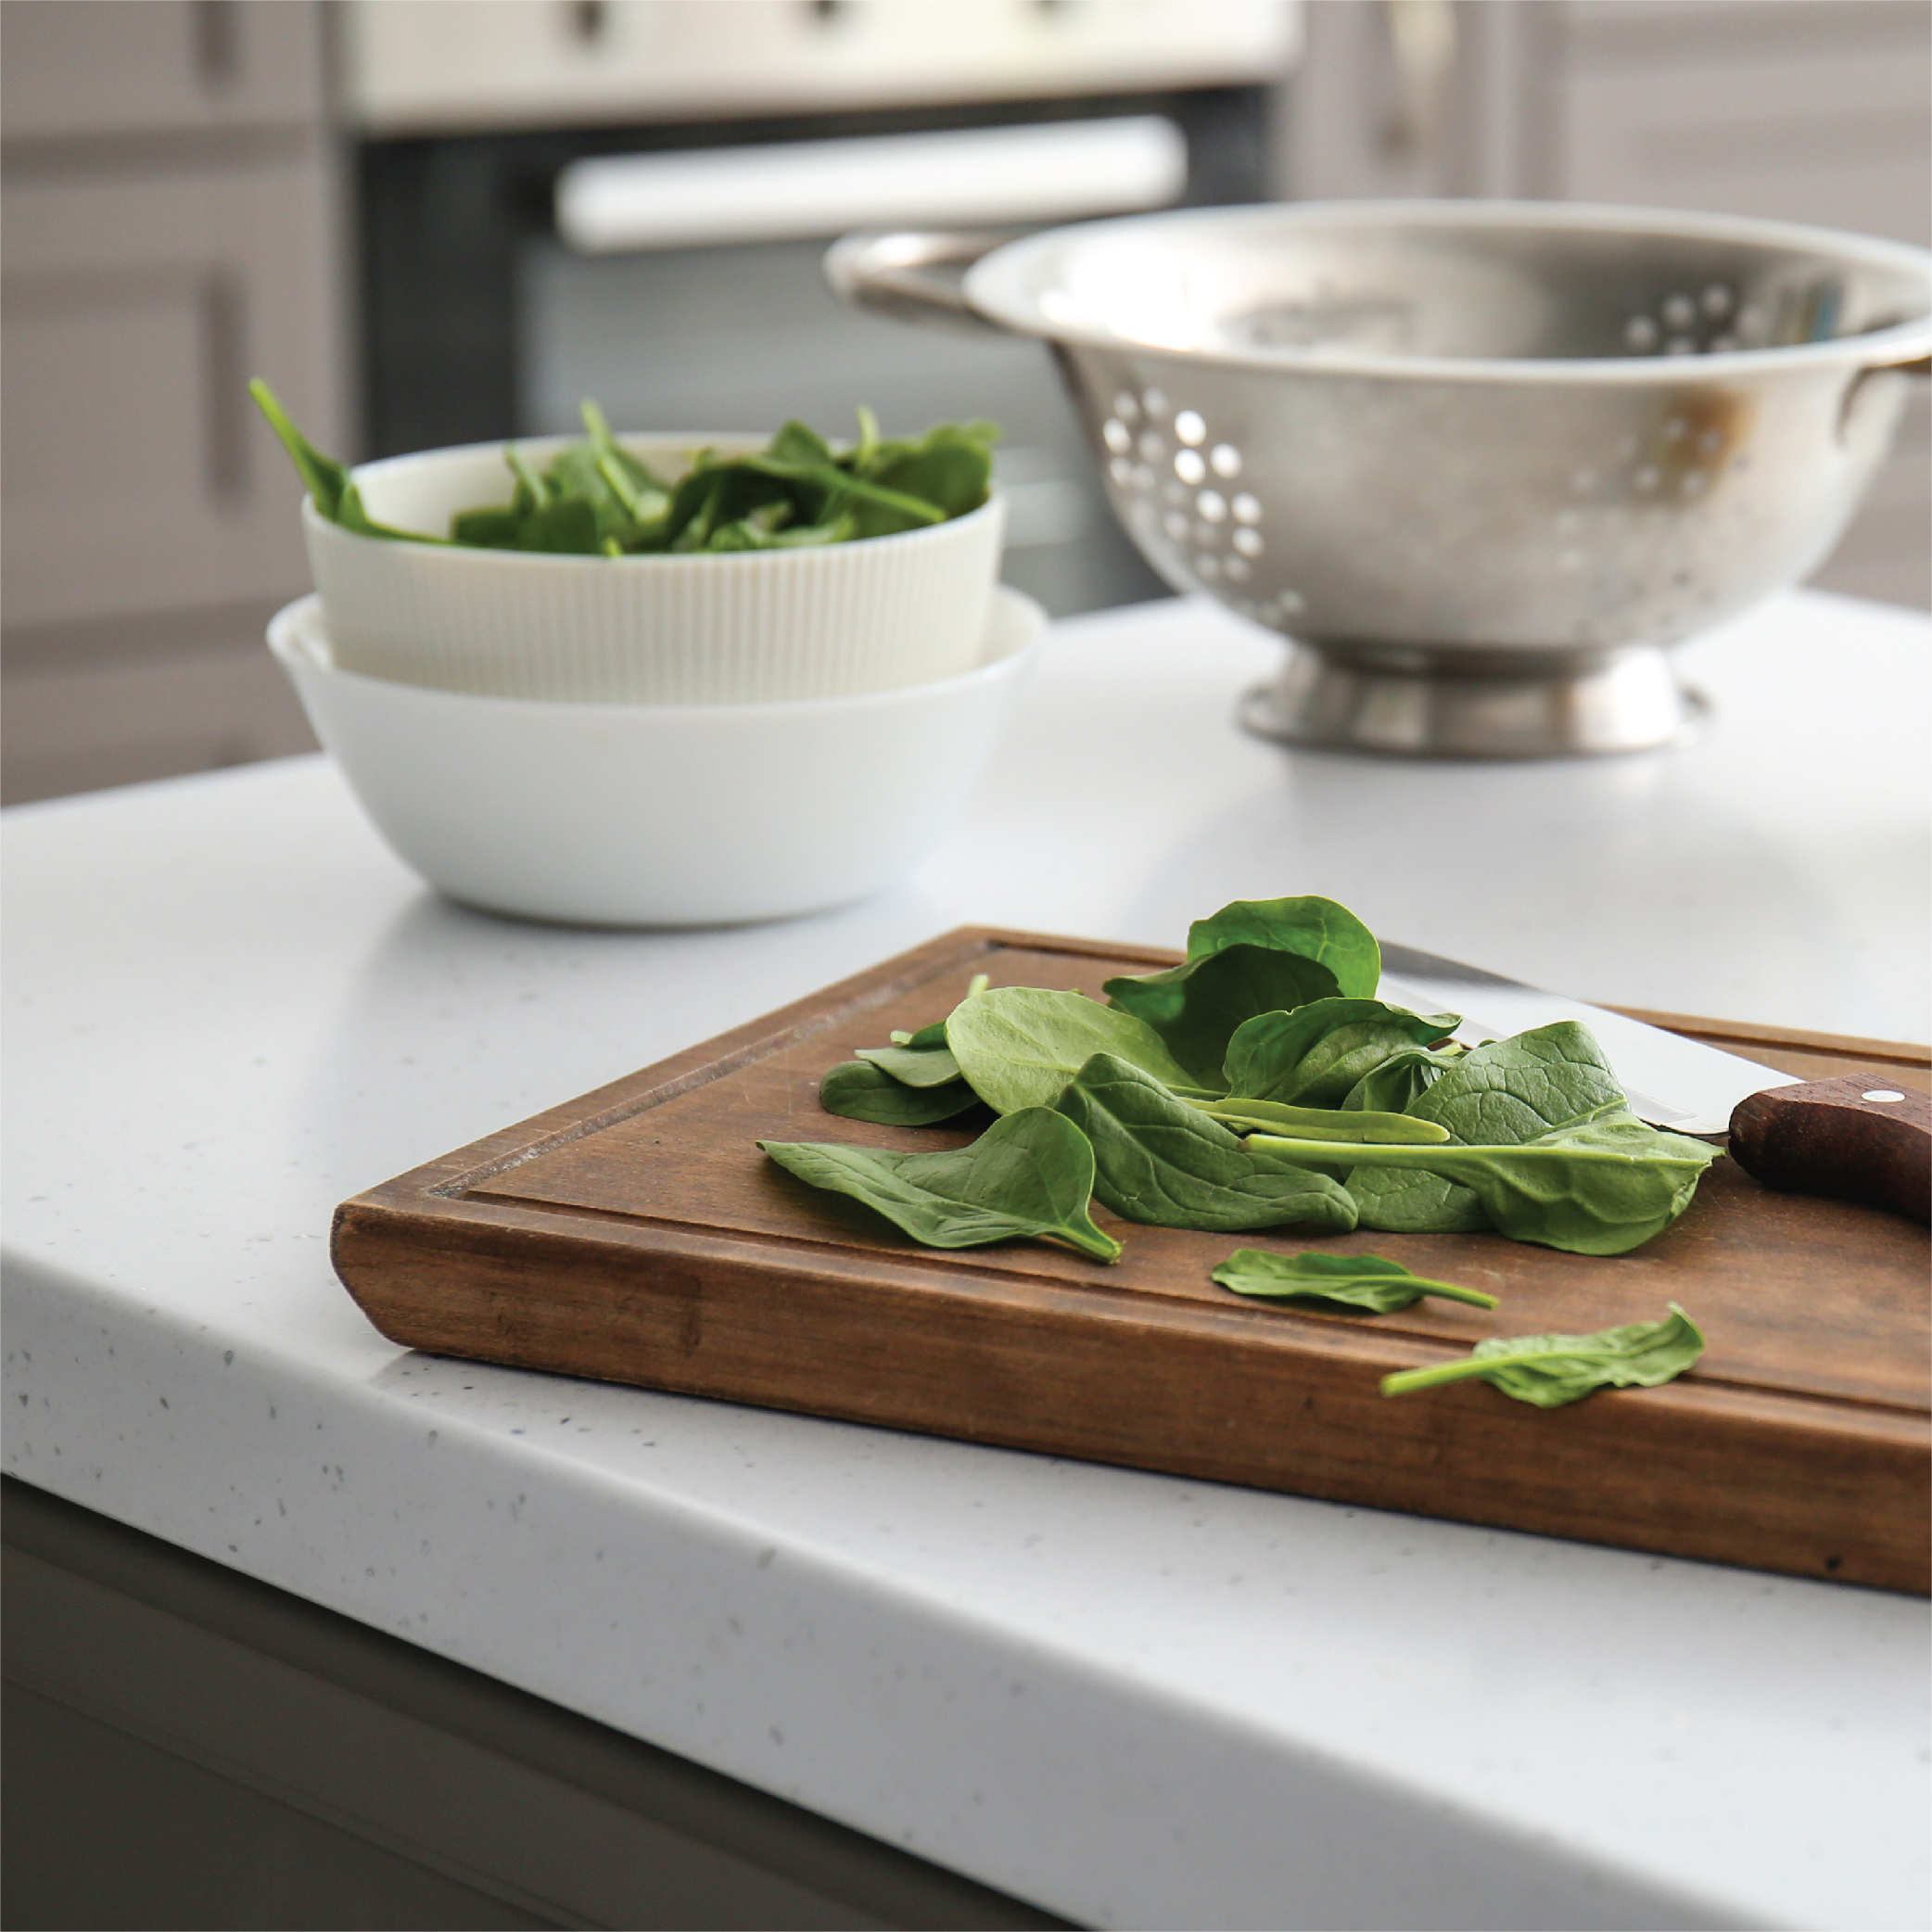 spinach on cutting board in kitchen